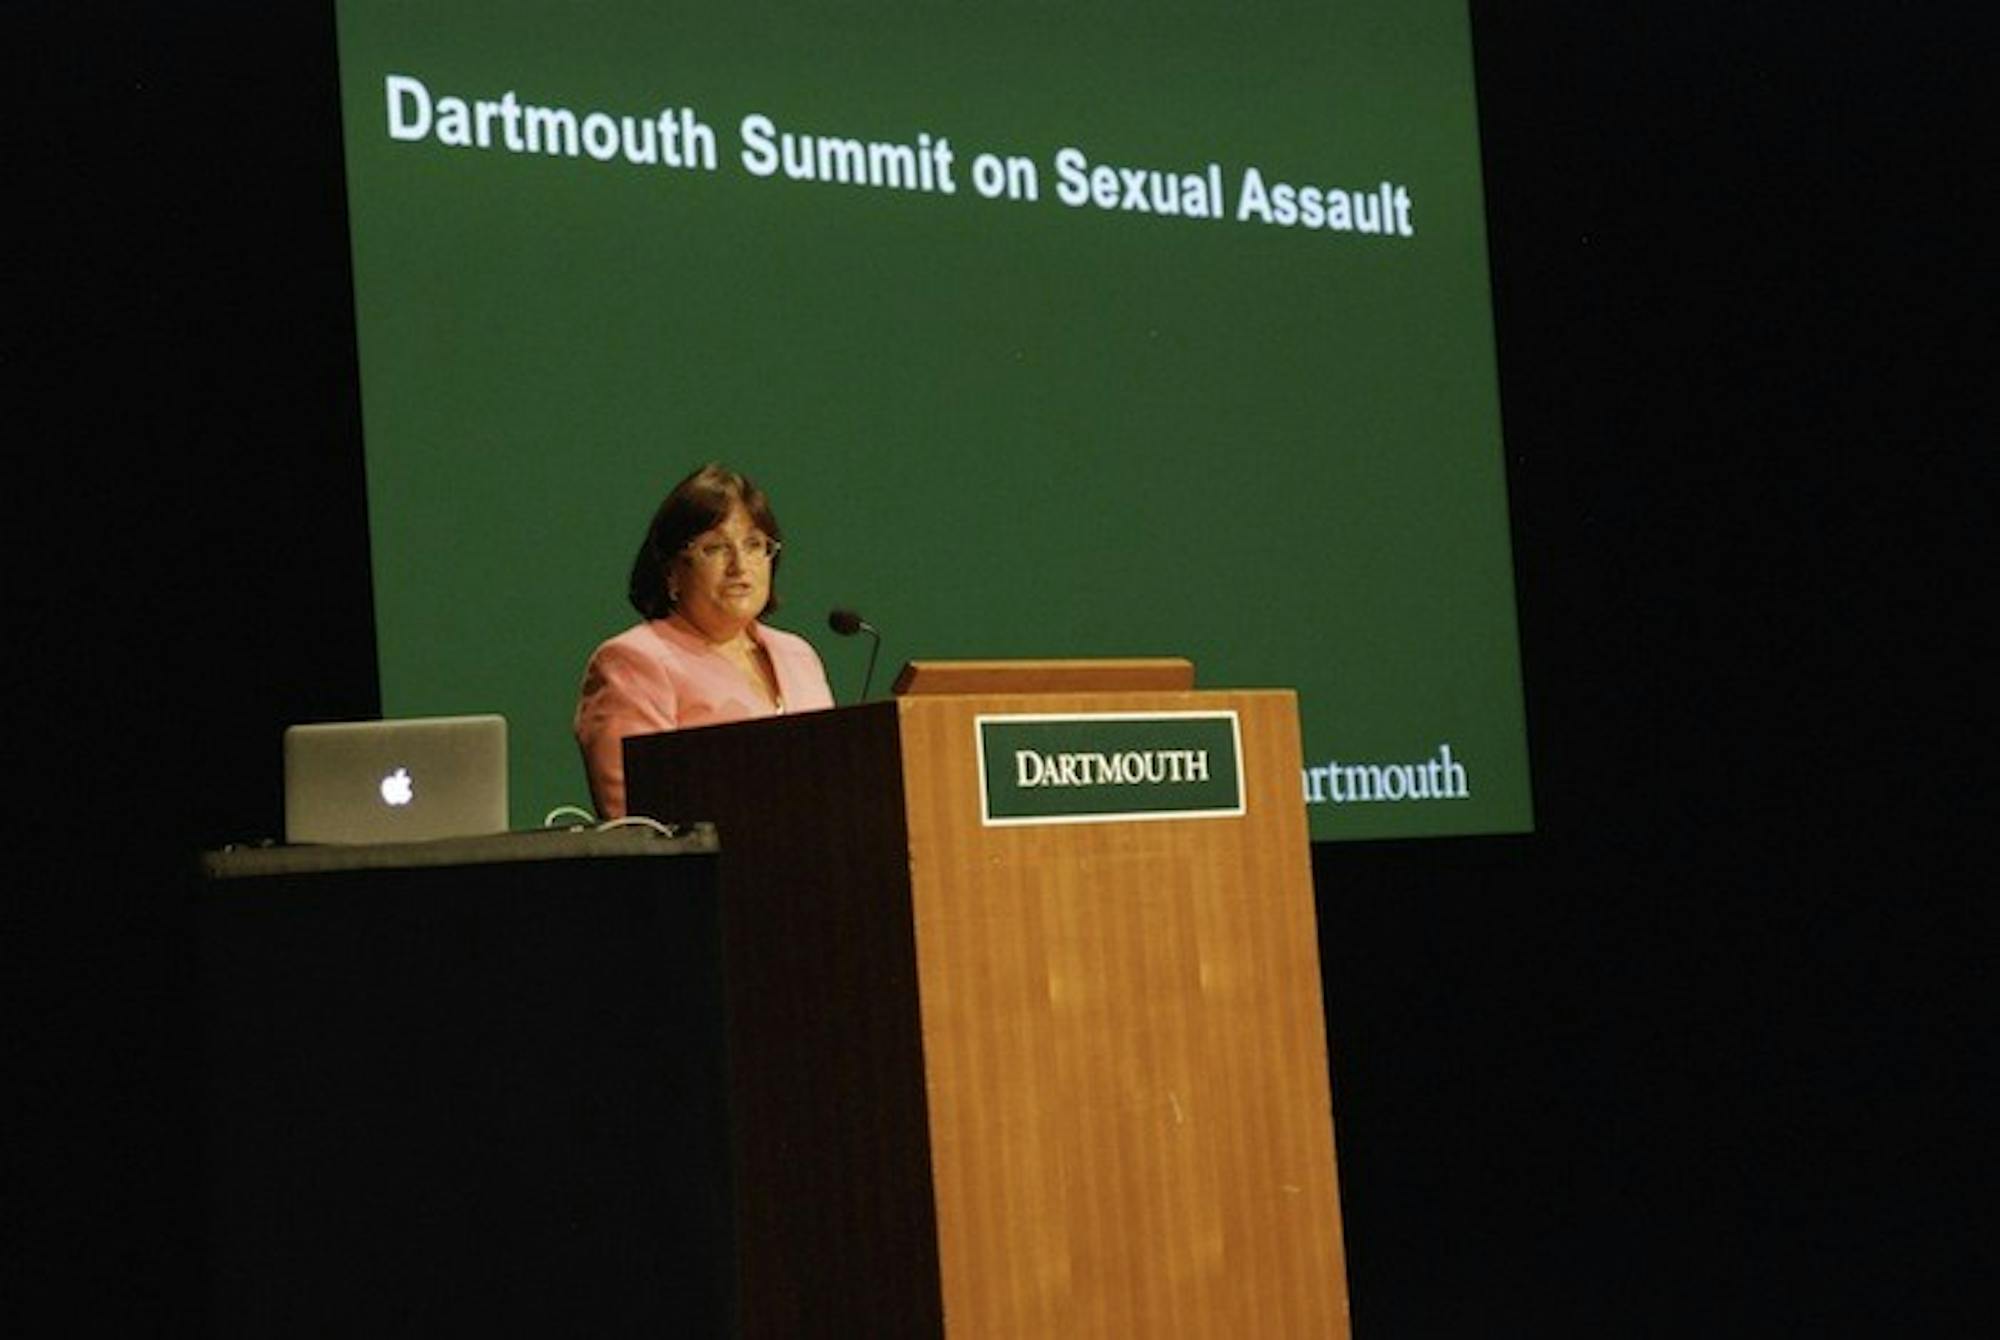 Dartmouth hosts visitors for its first Summit on Sexual Assault